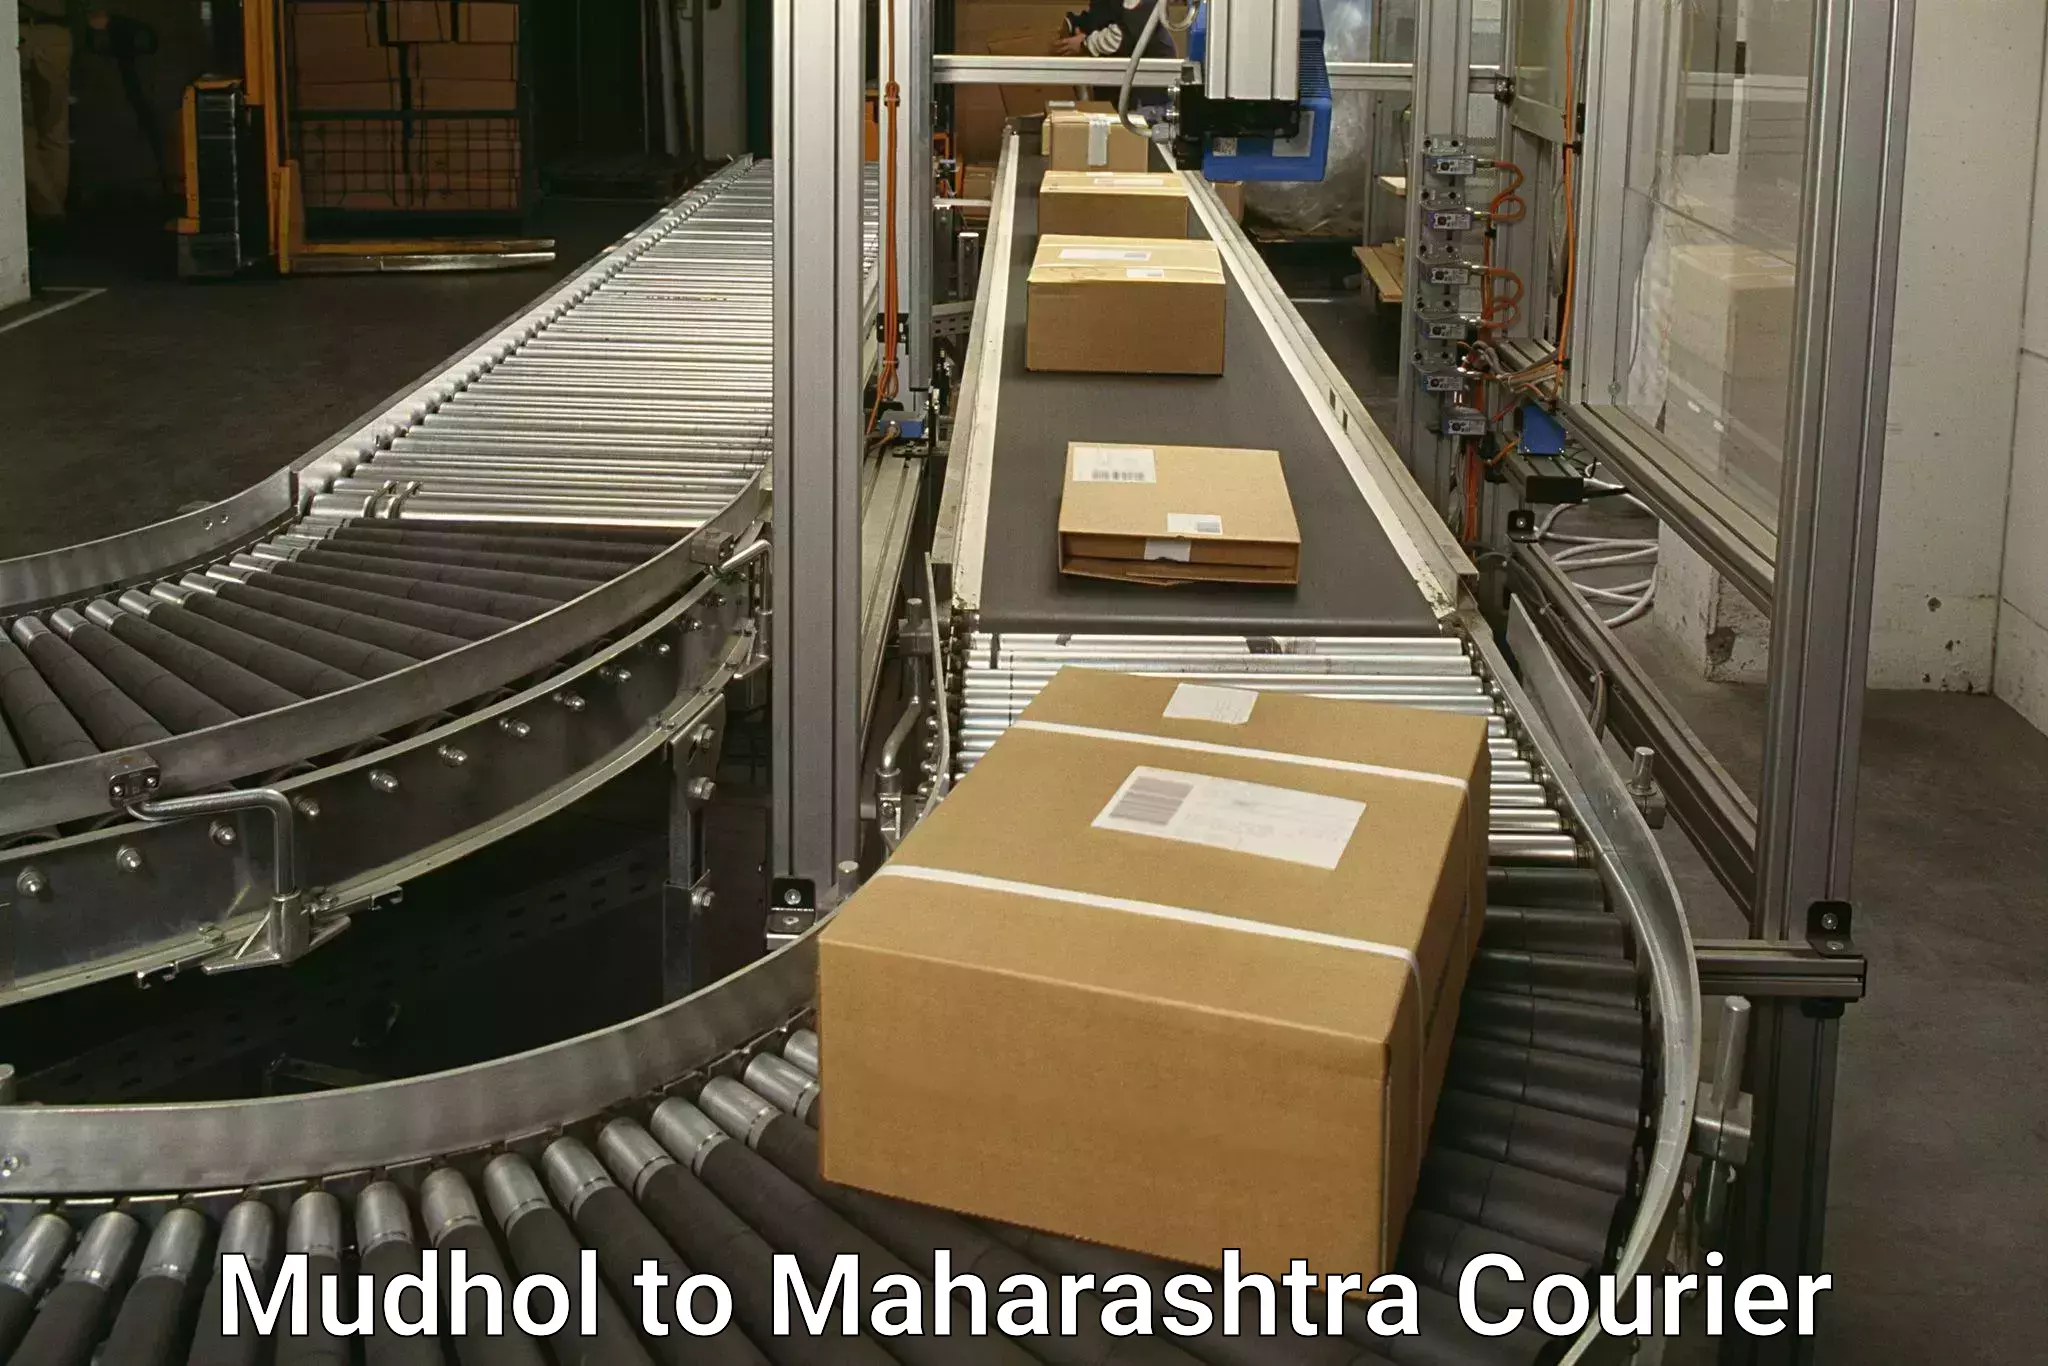 Easy access courier services Mudhol to Pimpri Chinchwad